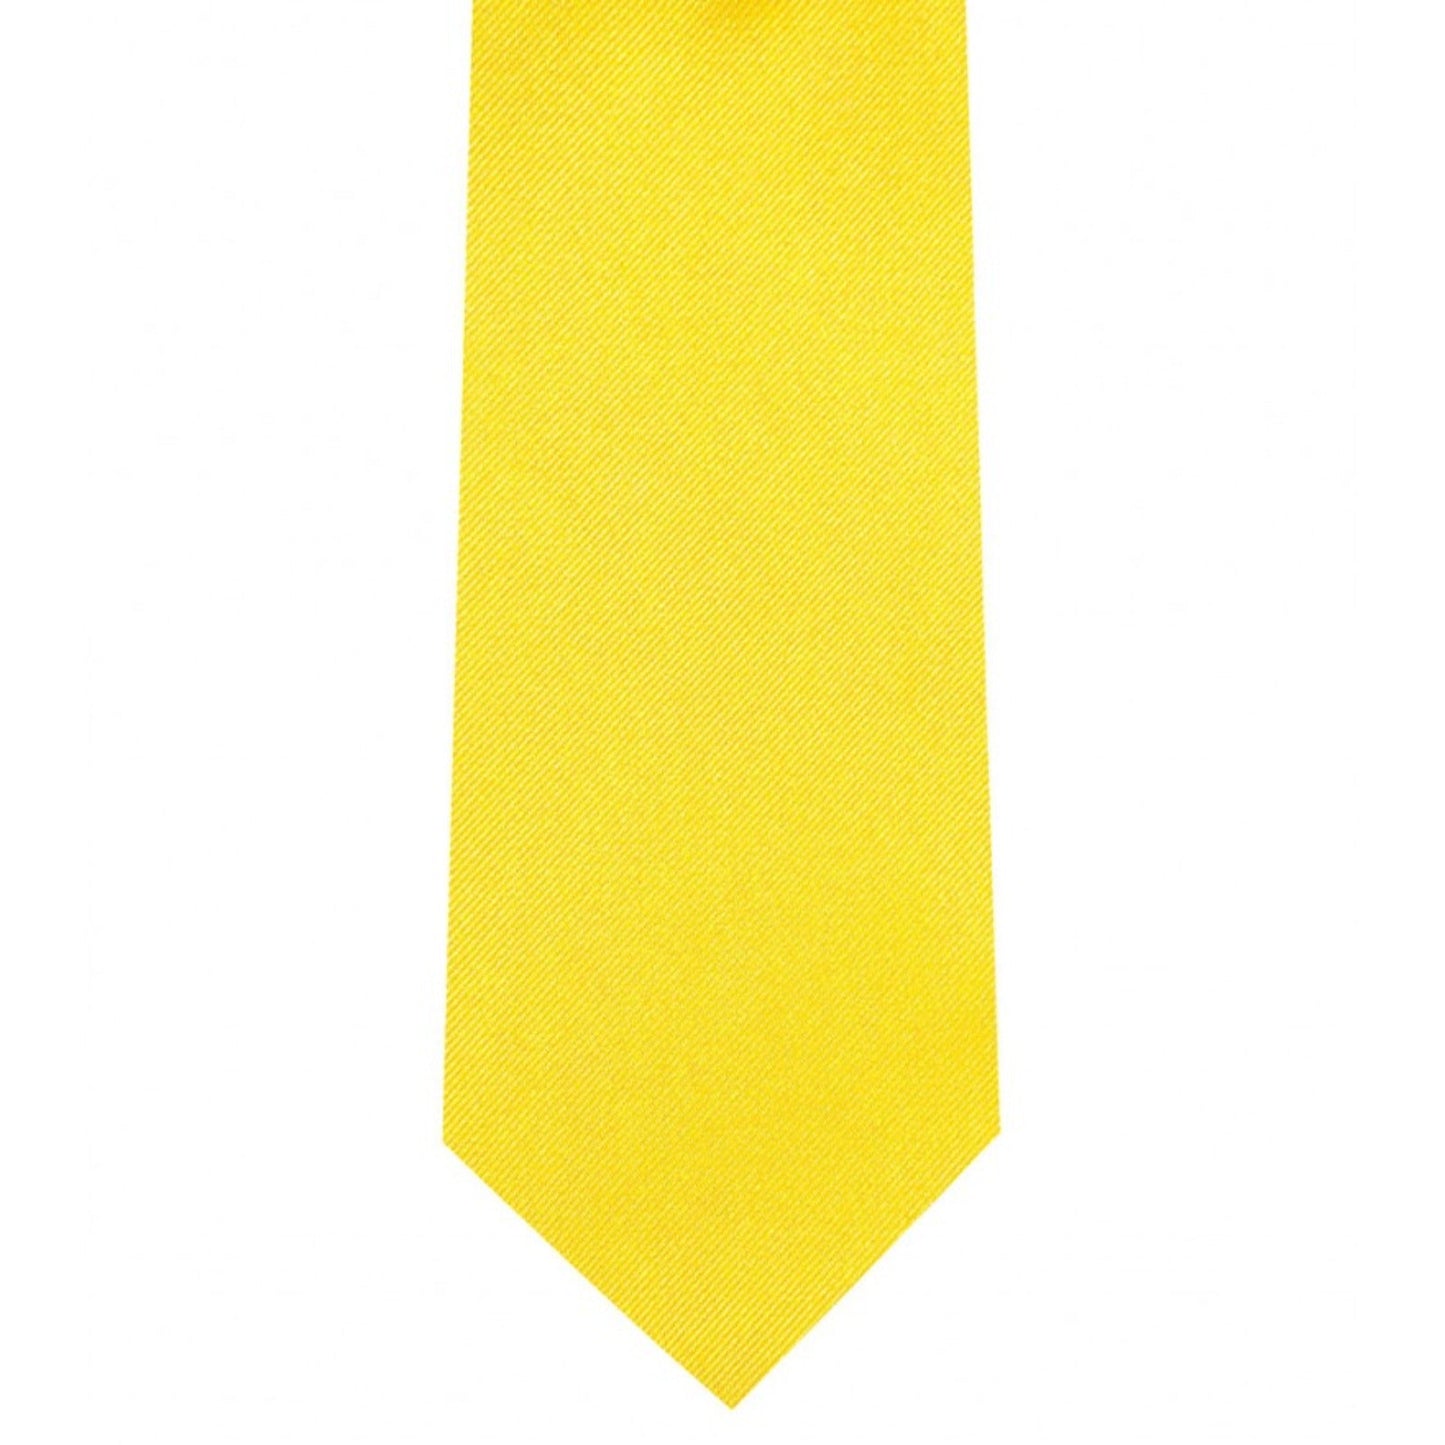 Classic Yellow Tie Ultra Skinny tie width 2.25 inches With Matching Pocket Square | KCT Menswear